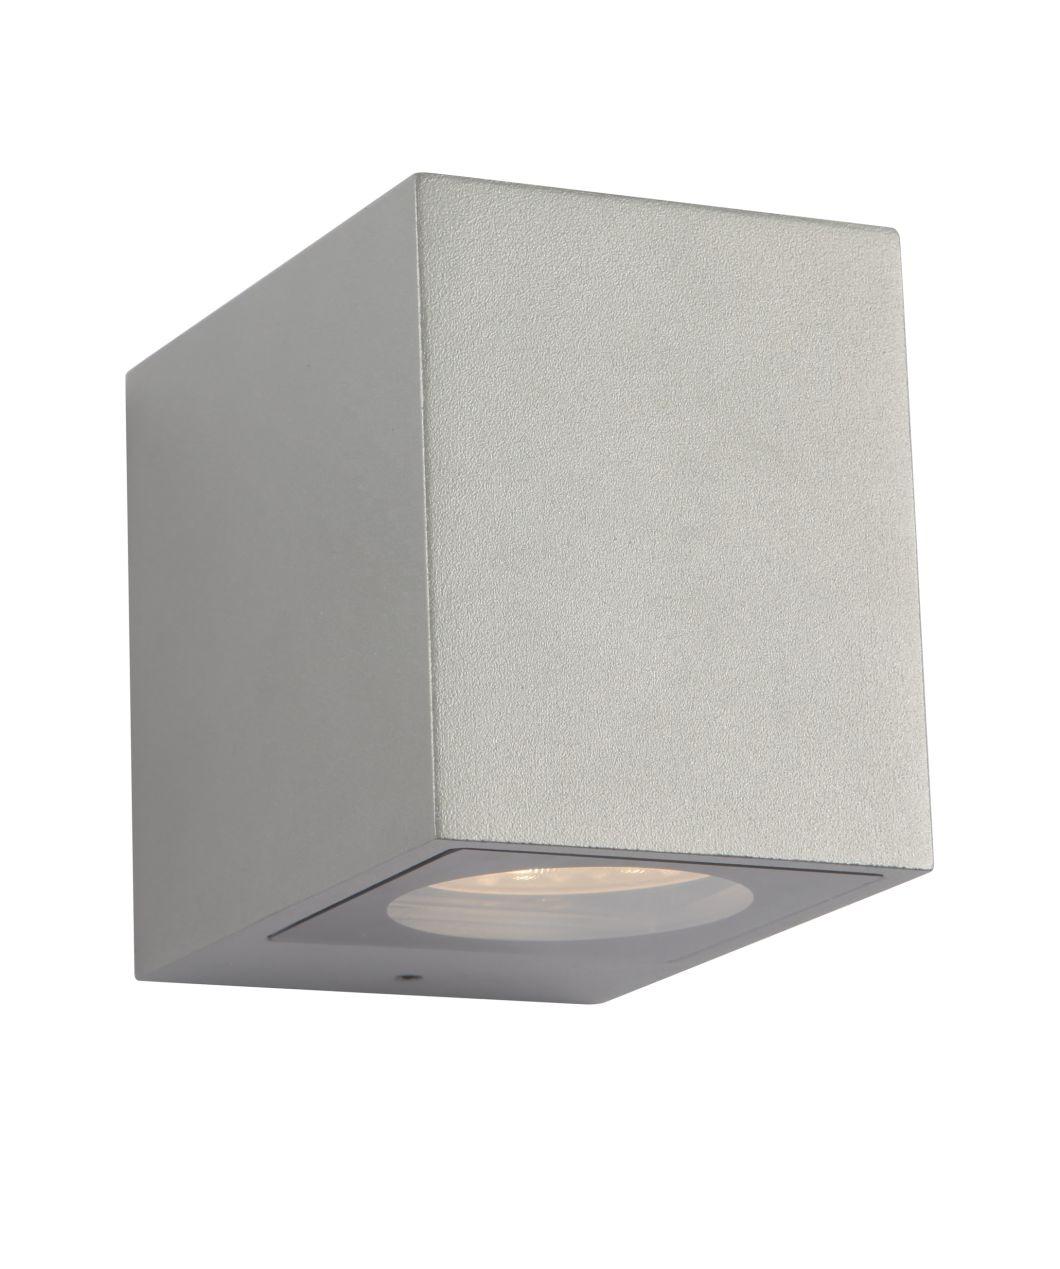 High Quality Competitive Price IP65 Outdoor GU10 Wall Light